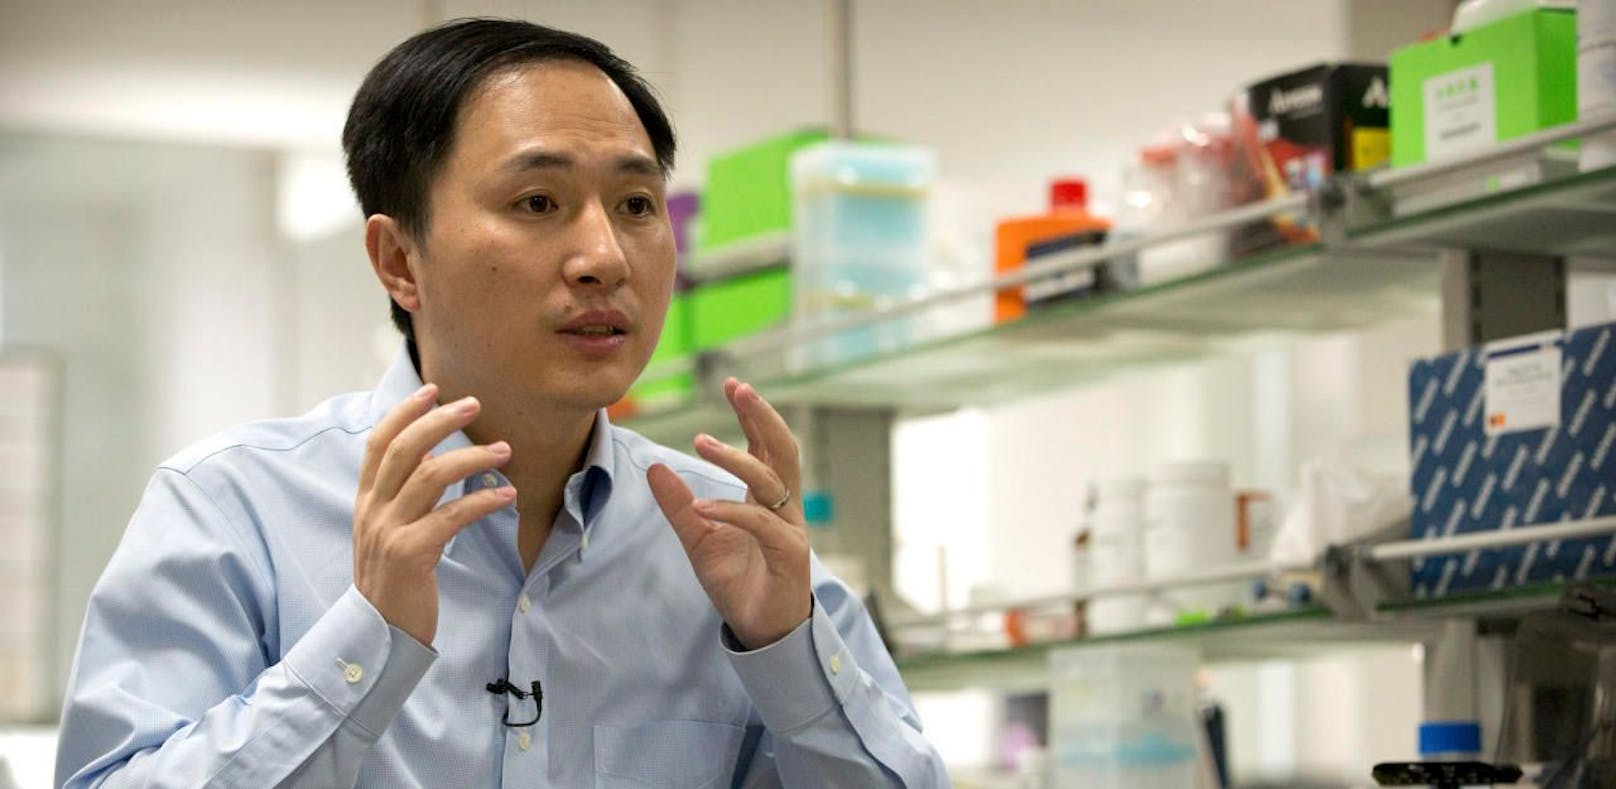 Download von www.picturedesk.com am 27.11.2018 (15:56). 
In this Oct. 10, 2018 photo, He Jiankui speaks during an interview at a laboratory in Shenzhen in southern China's Guangdong province. Chinese scientist He claims he helped make world's first genetically edited babies: twin girls whose DNA he said he altered. He revealed it Monday, Nov. 26, in Hong Kong to one of the organizers of an international conference on gene editing. (AP Photo/Mark Schiefelbein) - 20181010_PD15251